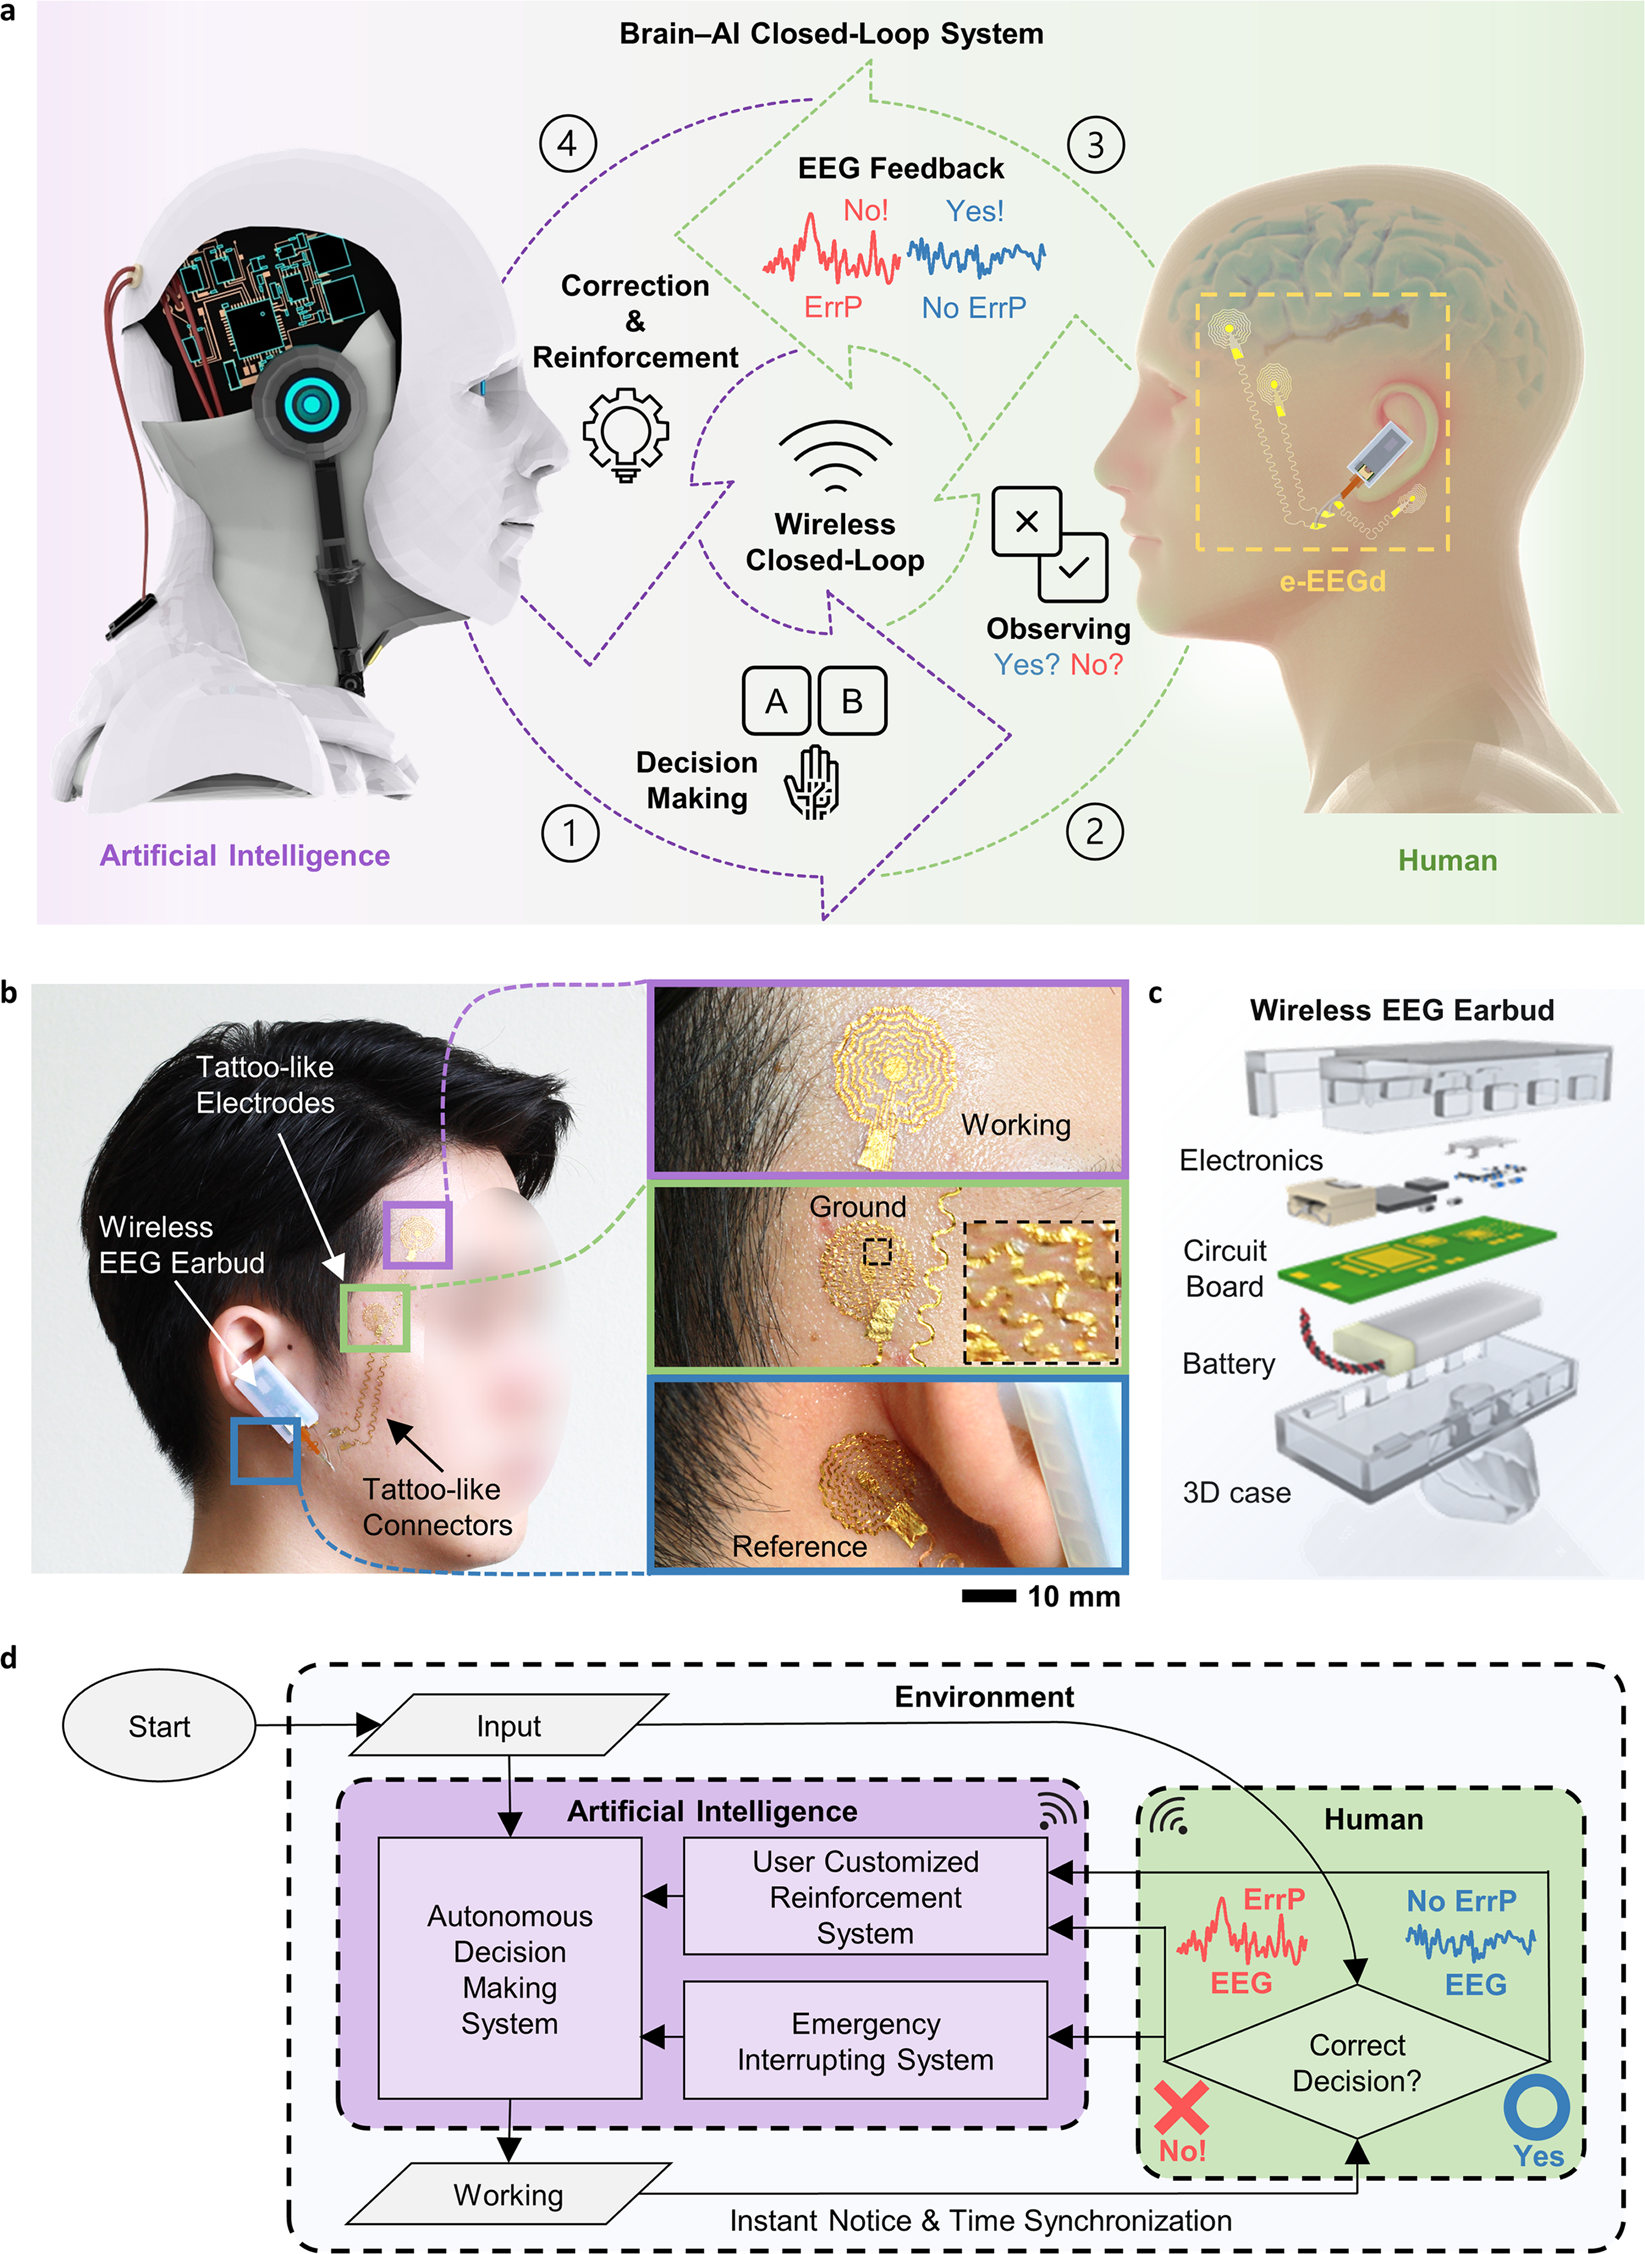 Wearable EEG electronics for a Brain–AI Closed-Loop System to